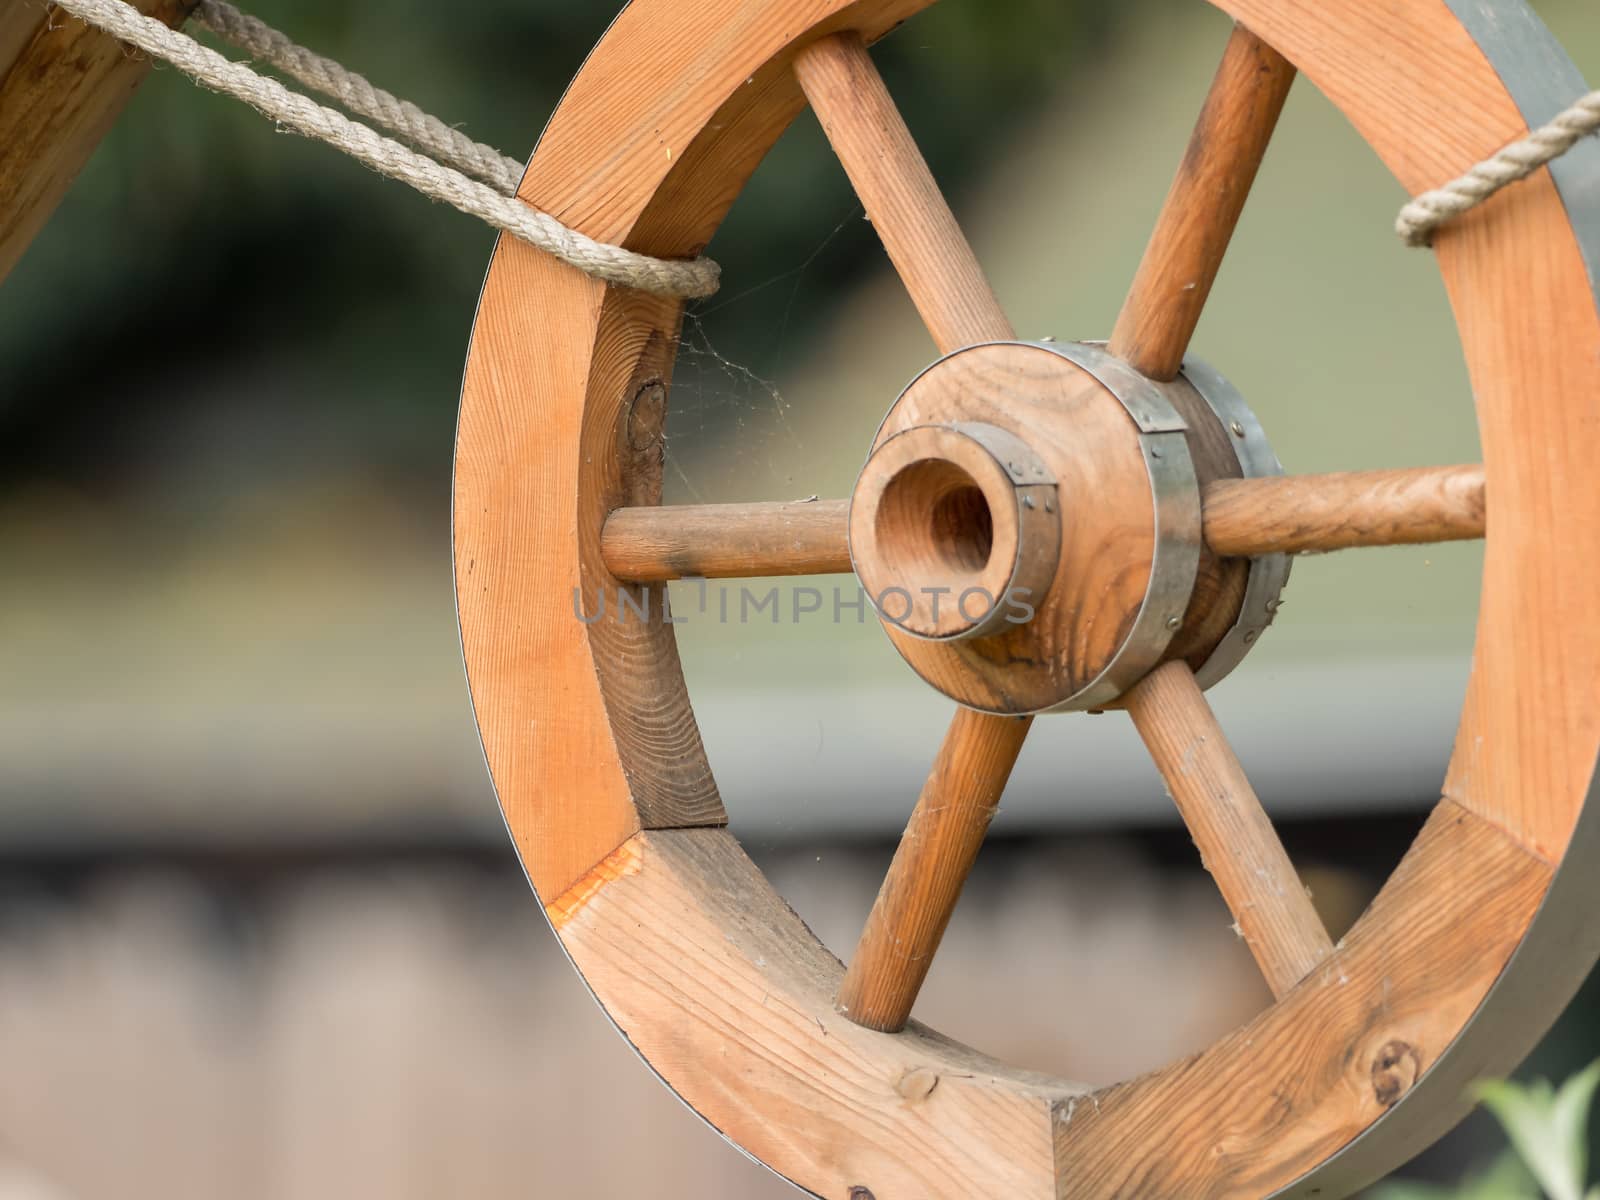 A wooden wheel hangs out as a decoration by sandra_fotodesign